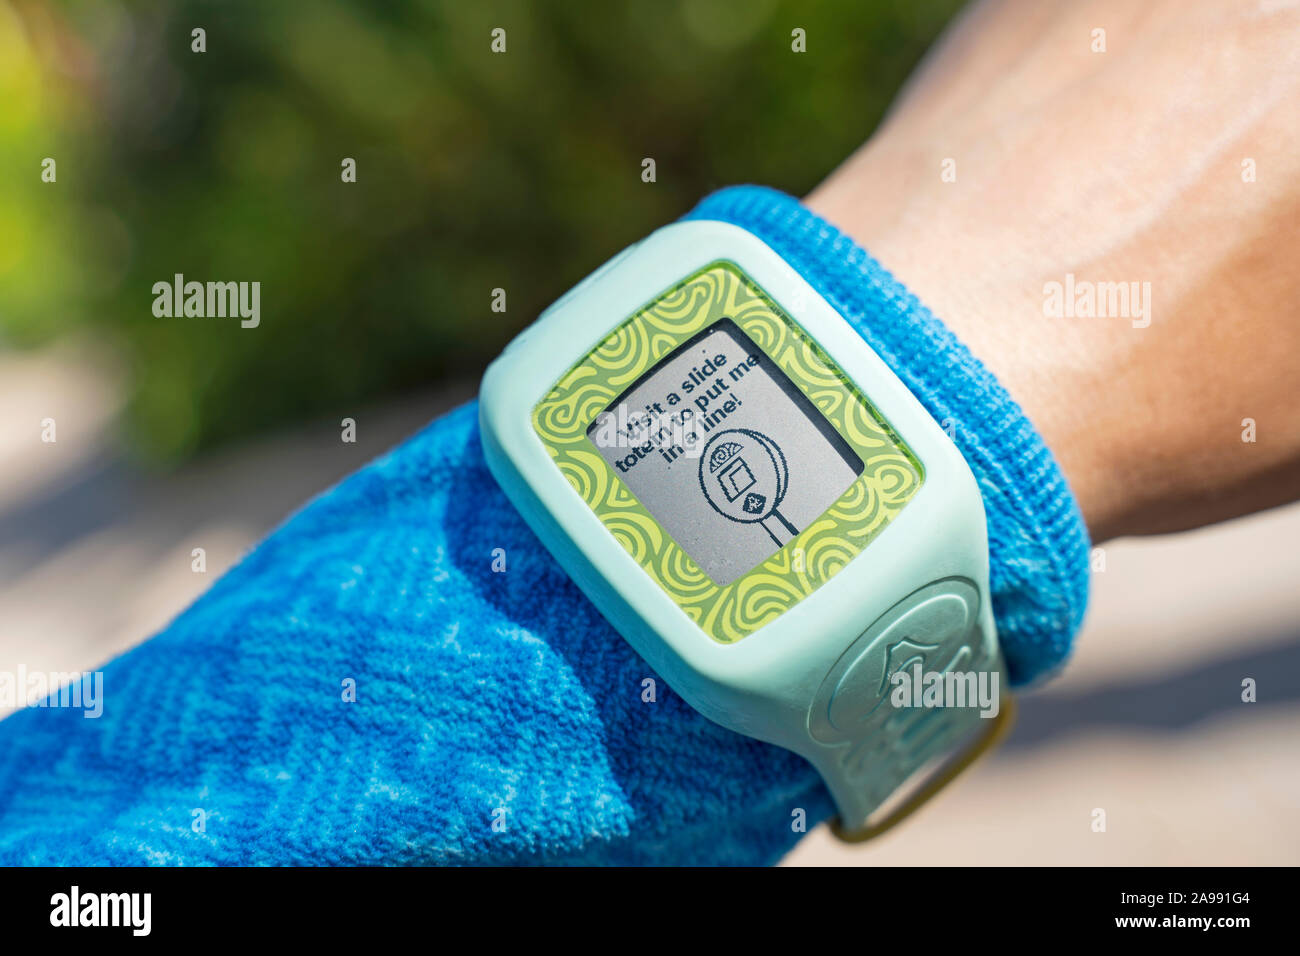 Volcano Bay TapuTapu Wearable, Wristband, Tap to access Virtual Line for rides and slides, Universal Orlando Resort, Florida, USA Stock Photo